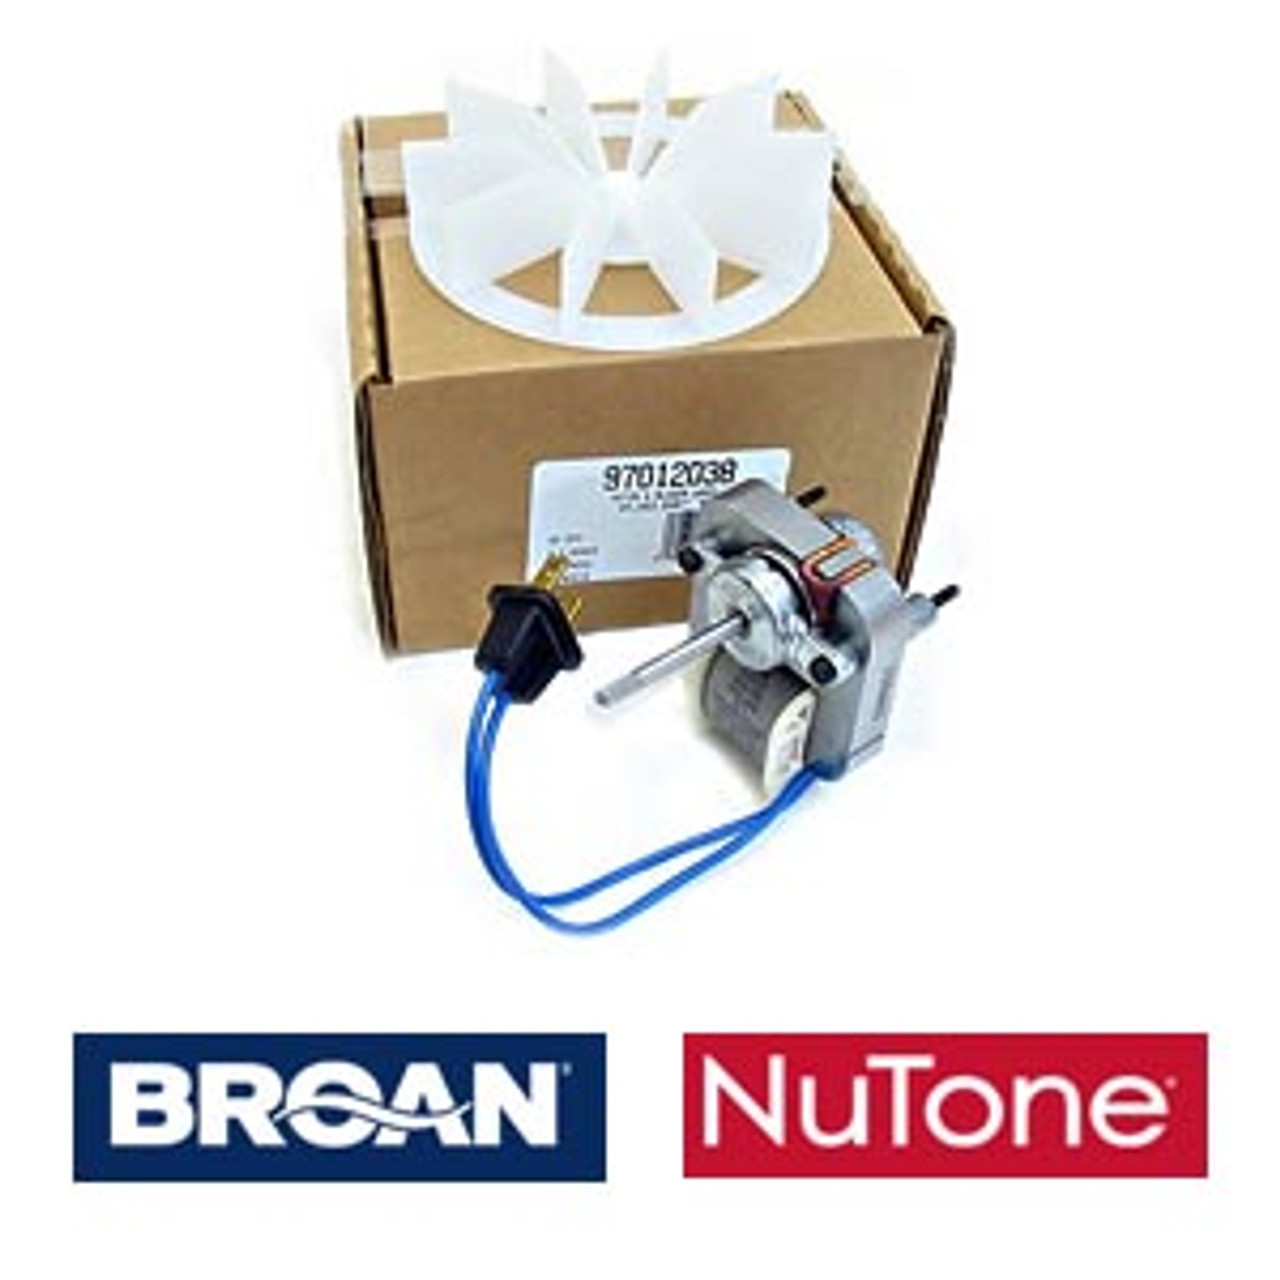 Broan-NuTone S97012038 - Replacement Motor and Blower Wheel